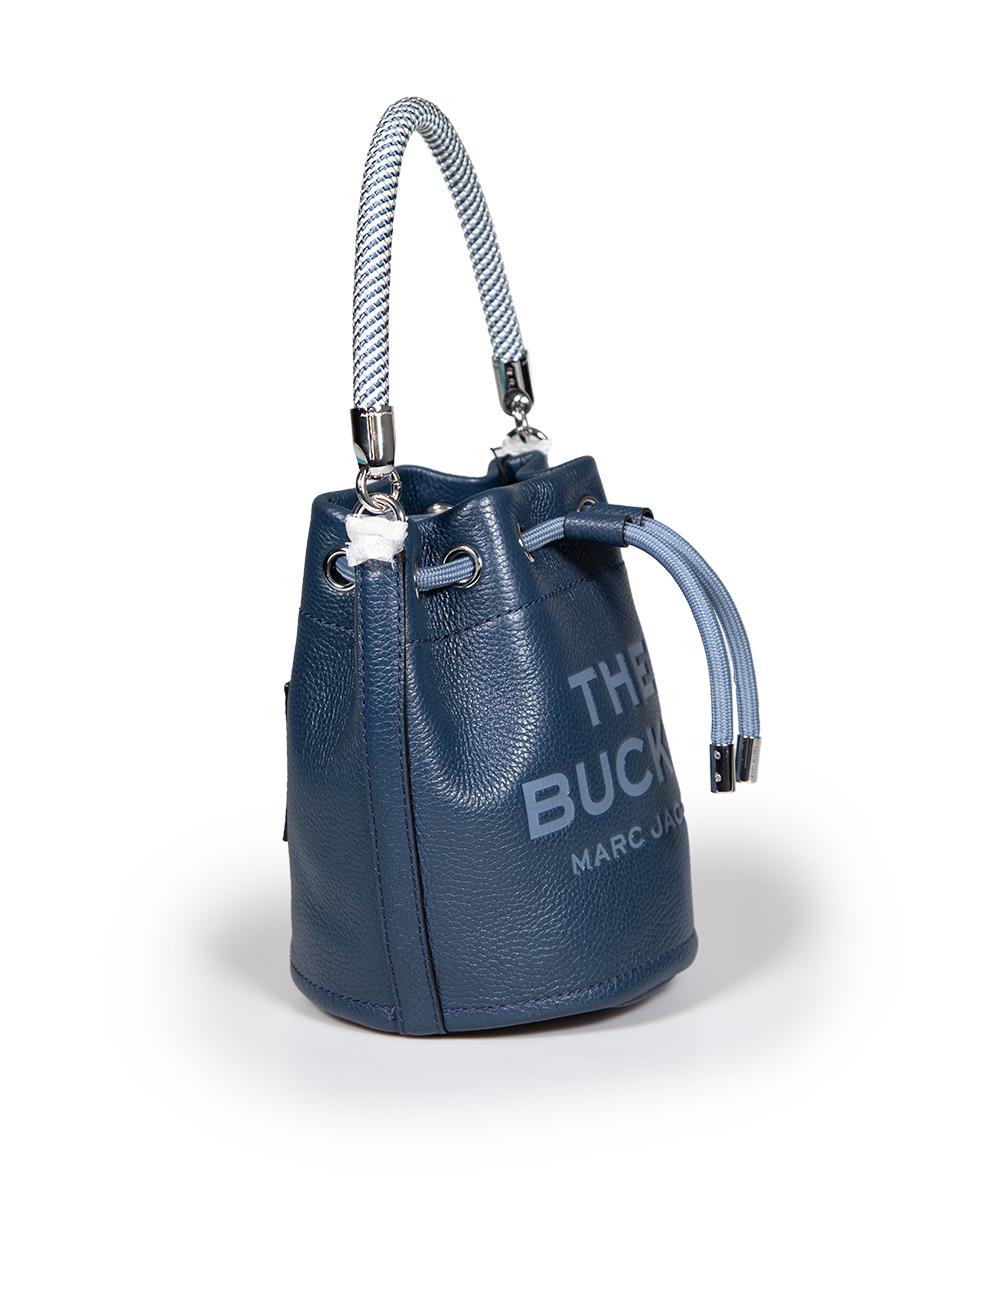 CONDITION is Never worn, with tags. No visible wear to bag is evident on this new Marc Jacobs designer resale item. This item comes with original dust bag.
 
 
 
 Details
 
 
 Model: The Bucket
 
 Blue
 
 Leather
 
 Mini bucket bag
 
 Silver tone